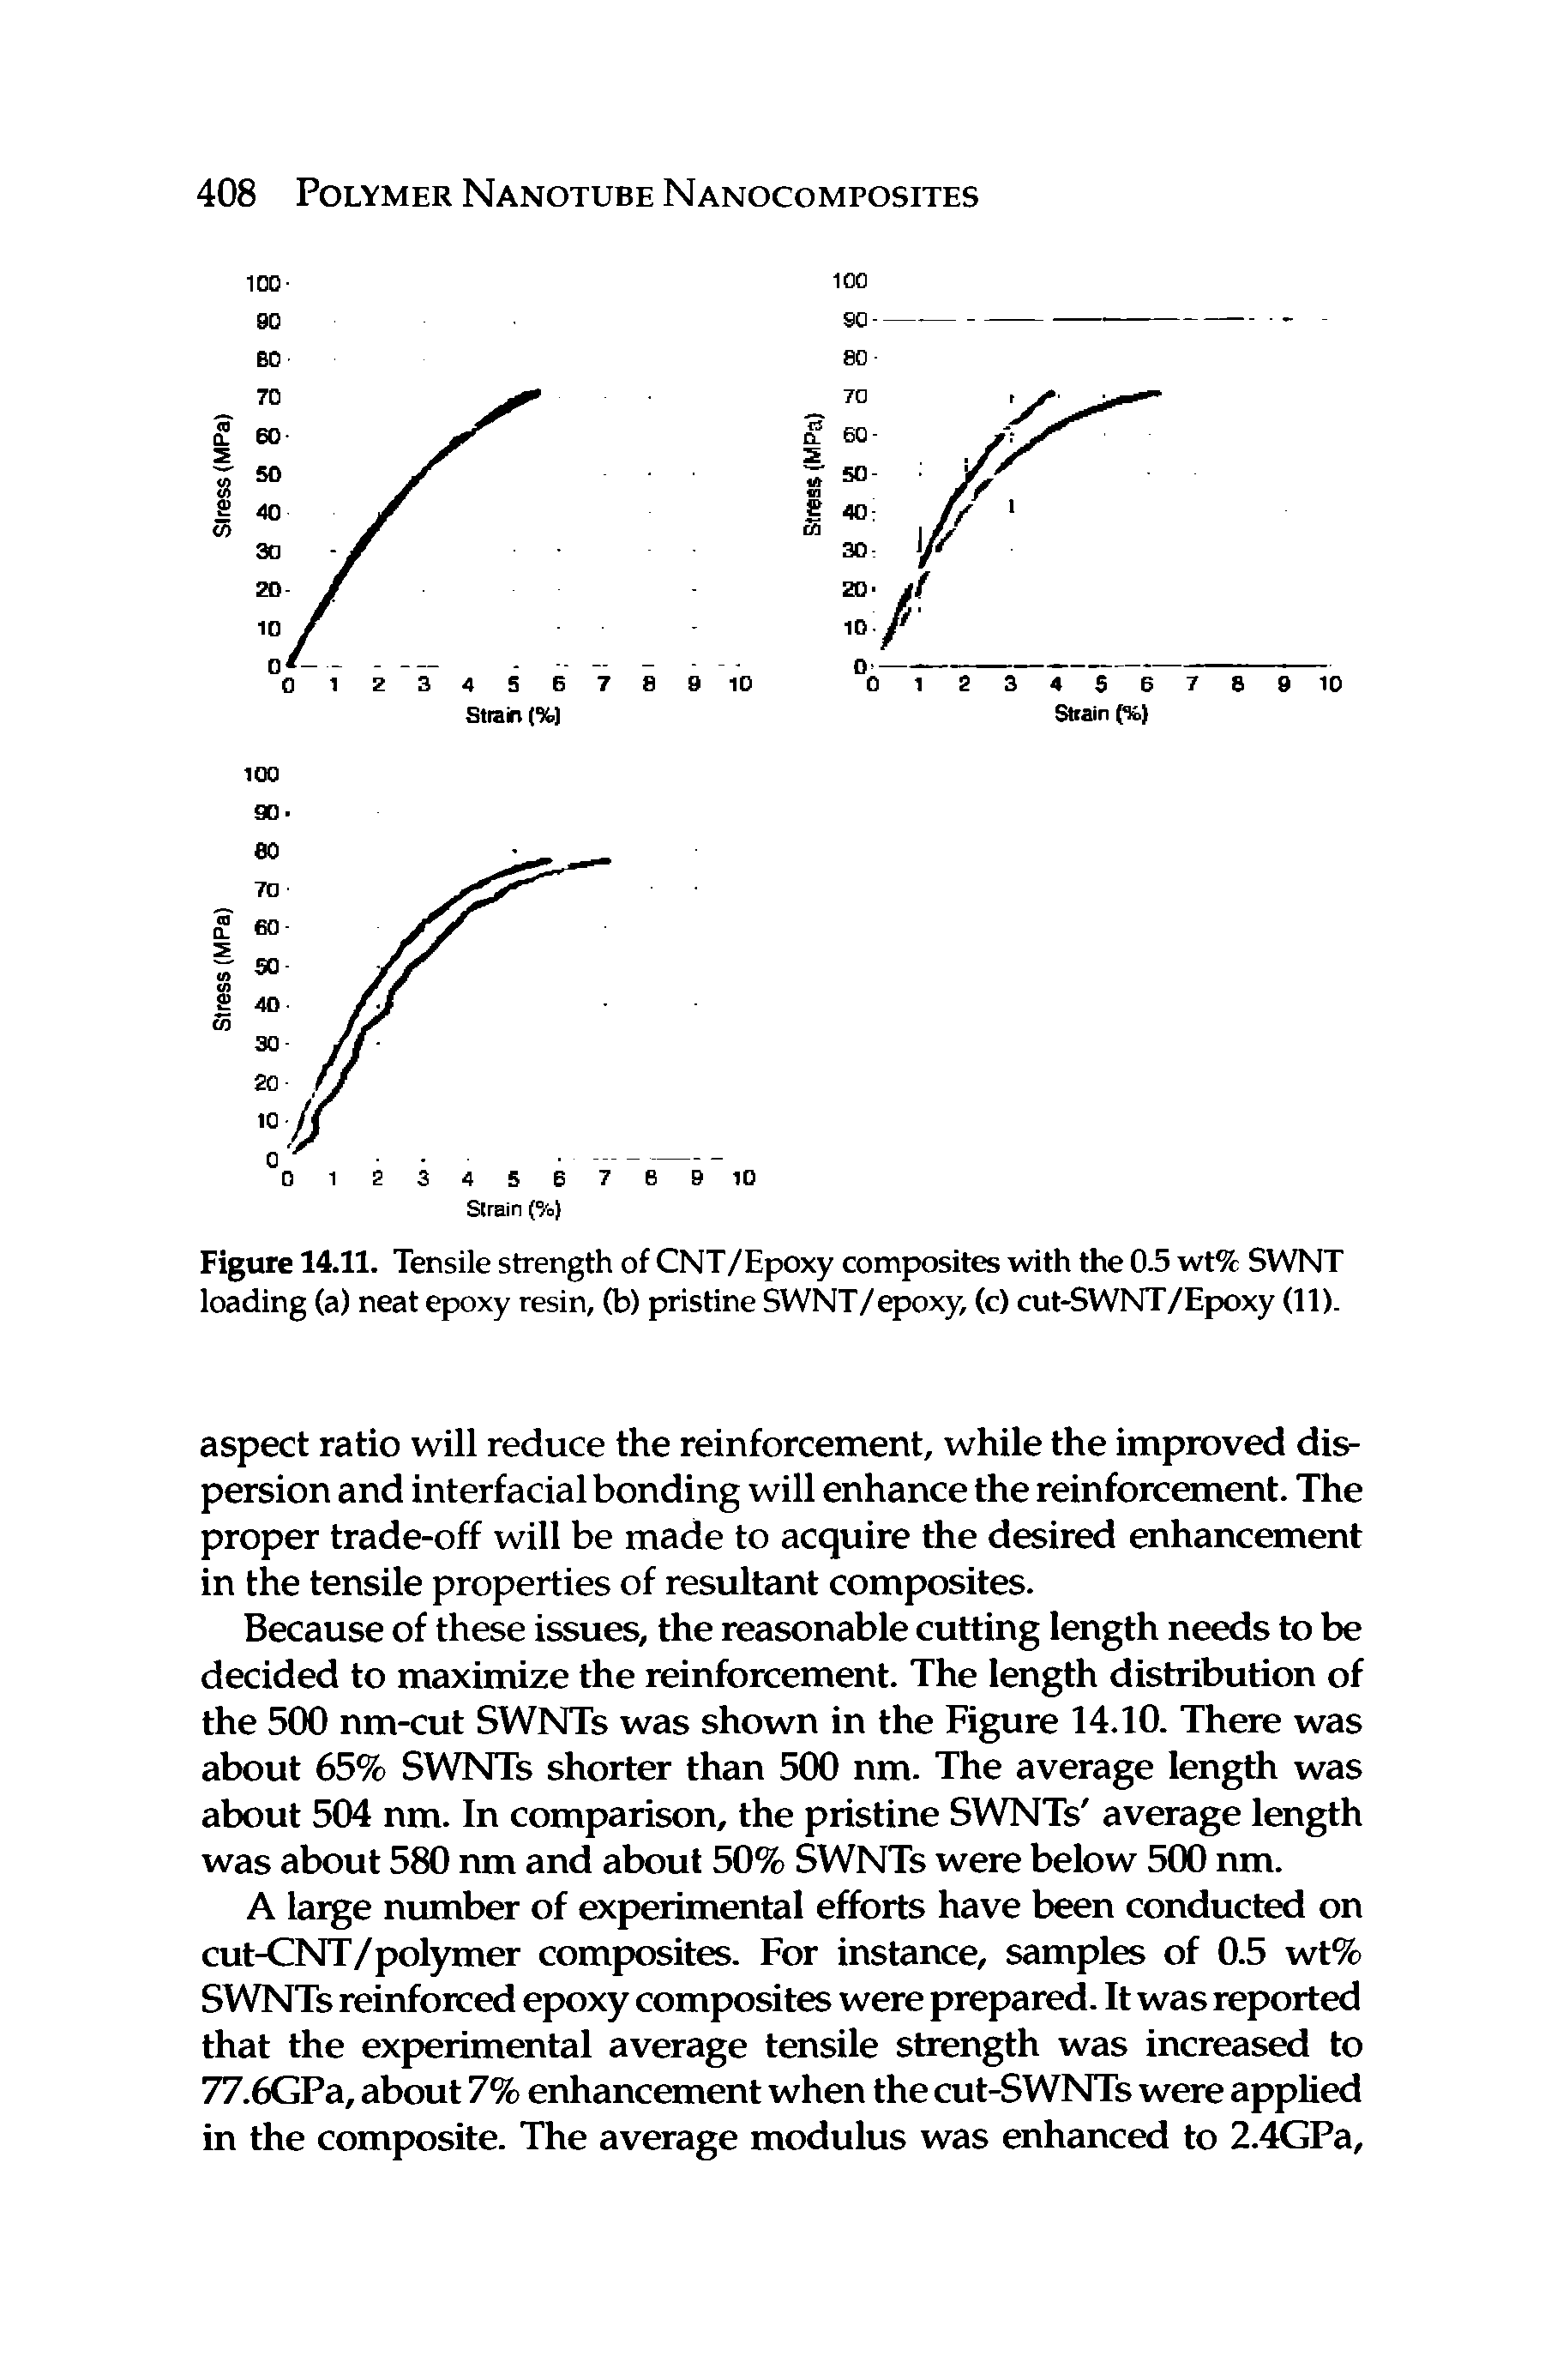 Figure 14.11. Tensile strength of CNT/Epoxy composites with the 0.5 wt% SWNT loading (a) neat epoxy resin, (b) pristine SWNT/epoxy, (c) cut-SWNT/Epoxy (11).